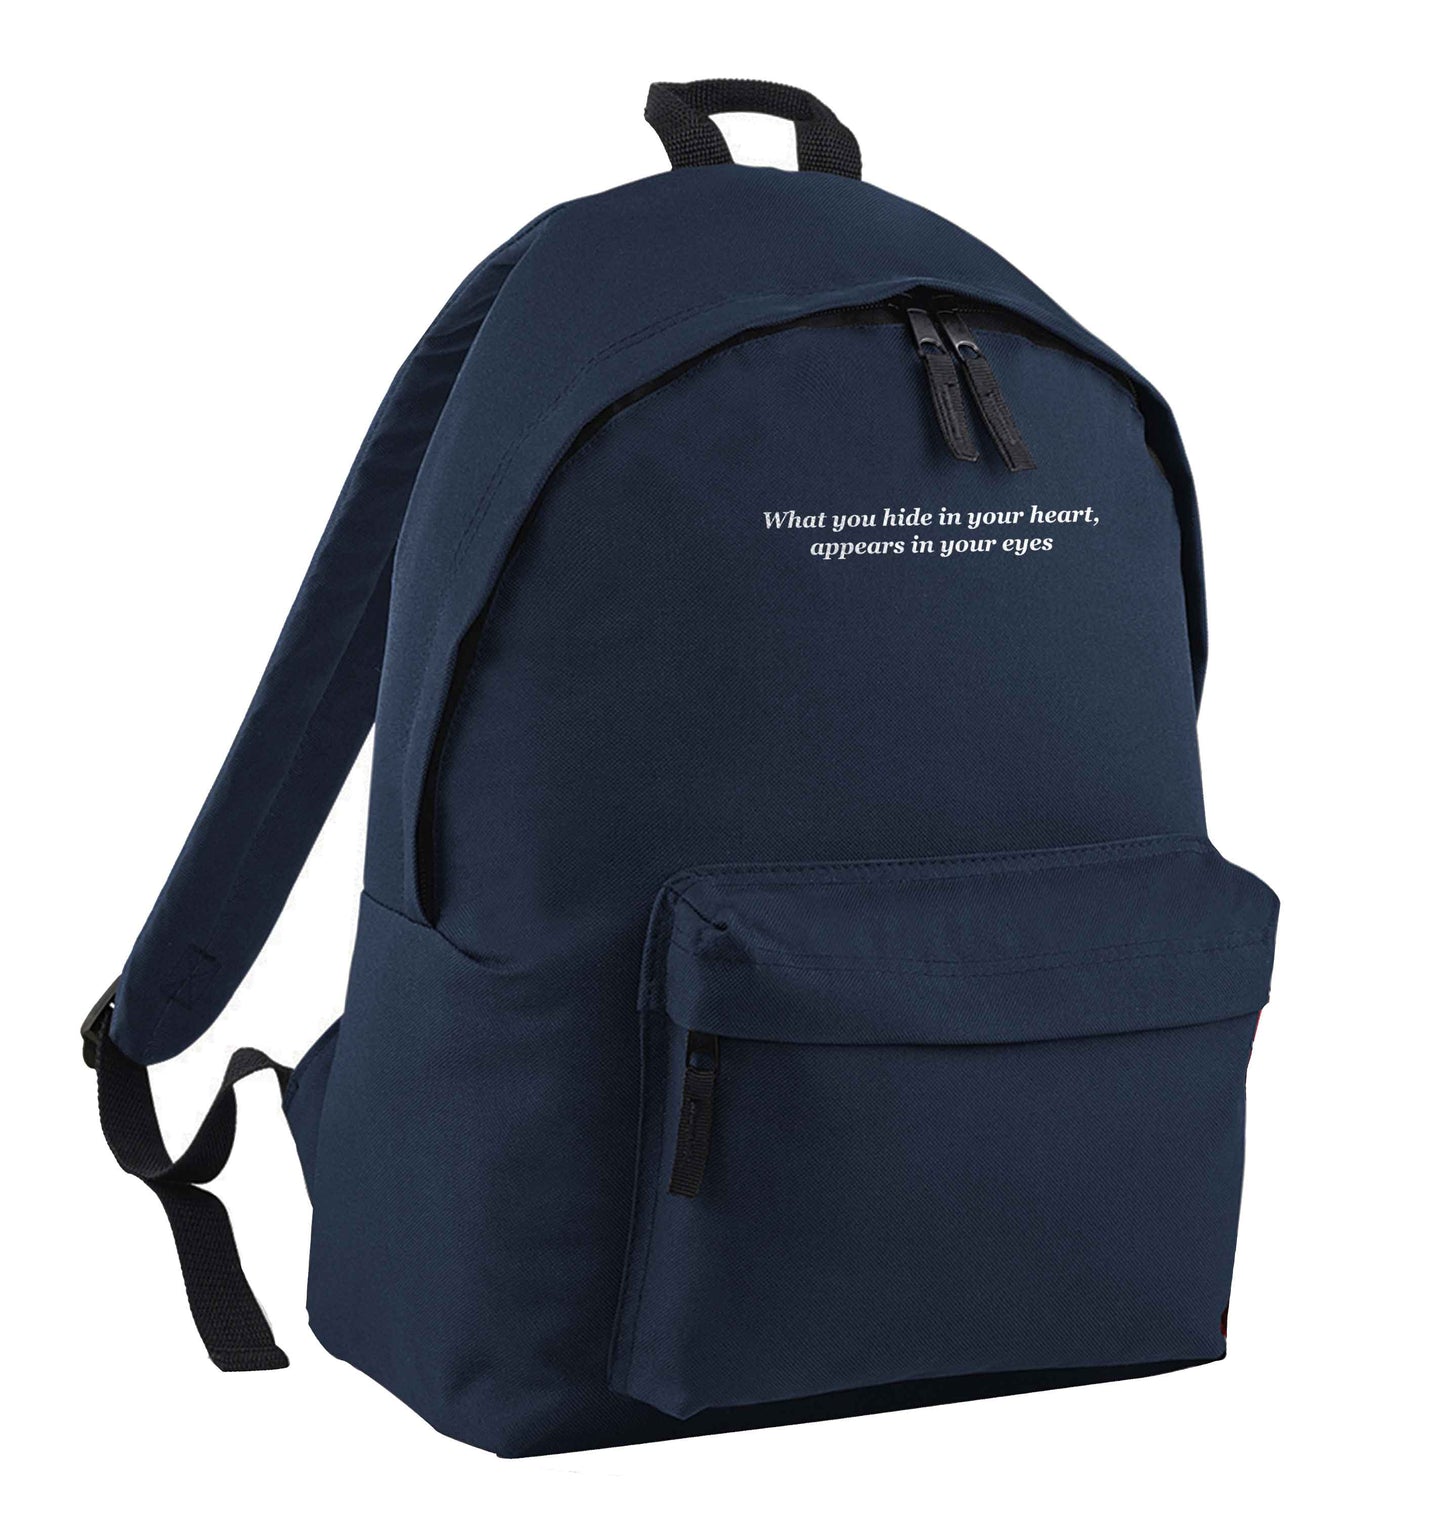 What you hide in your heart, appears in your eyes navy adults backpack